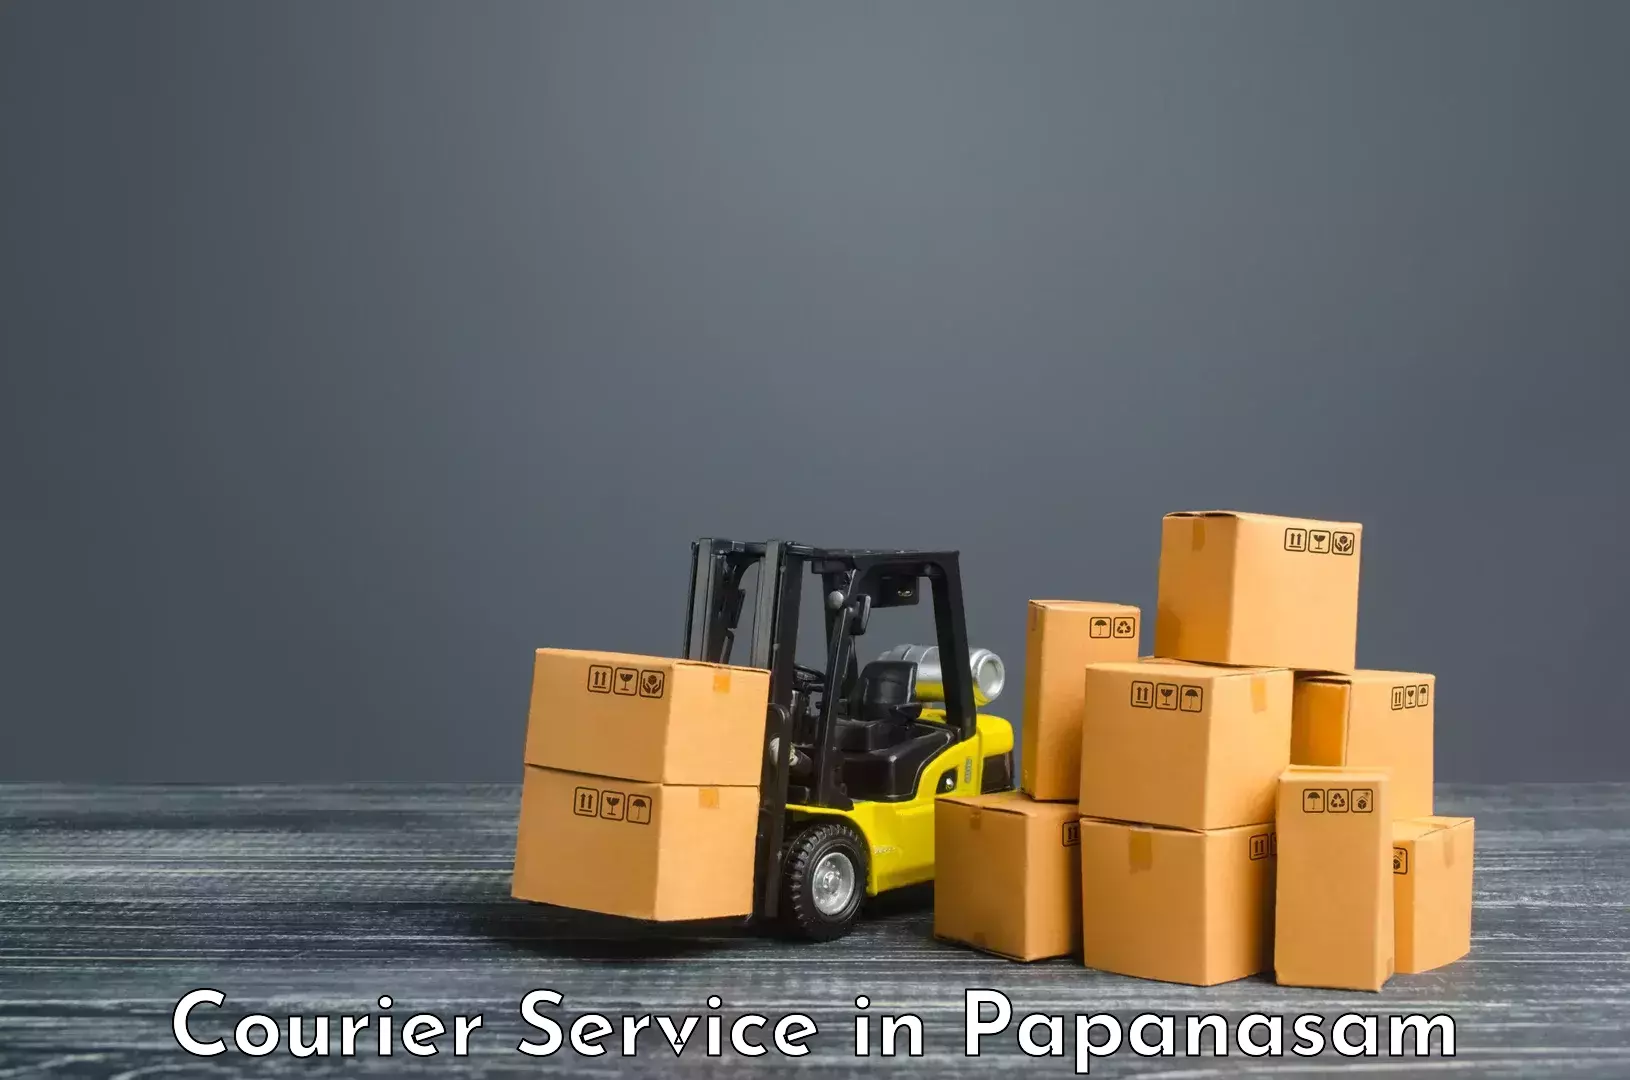 Urban courier service in Papanasam